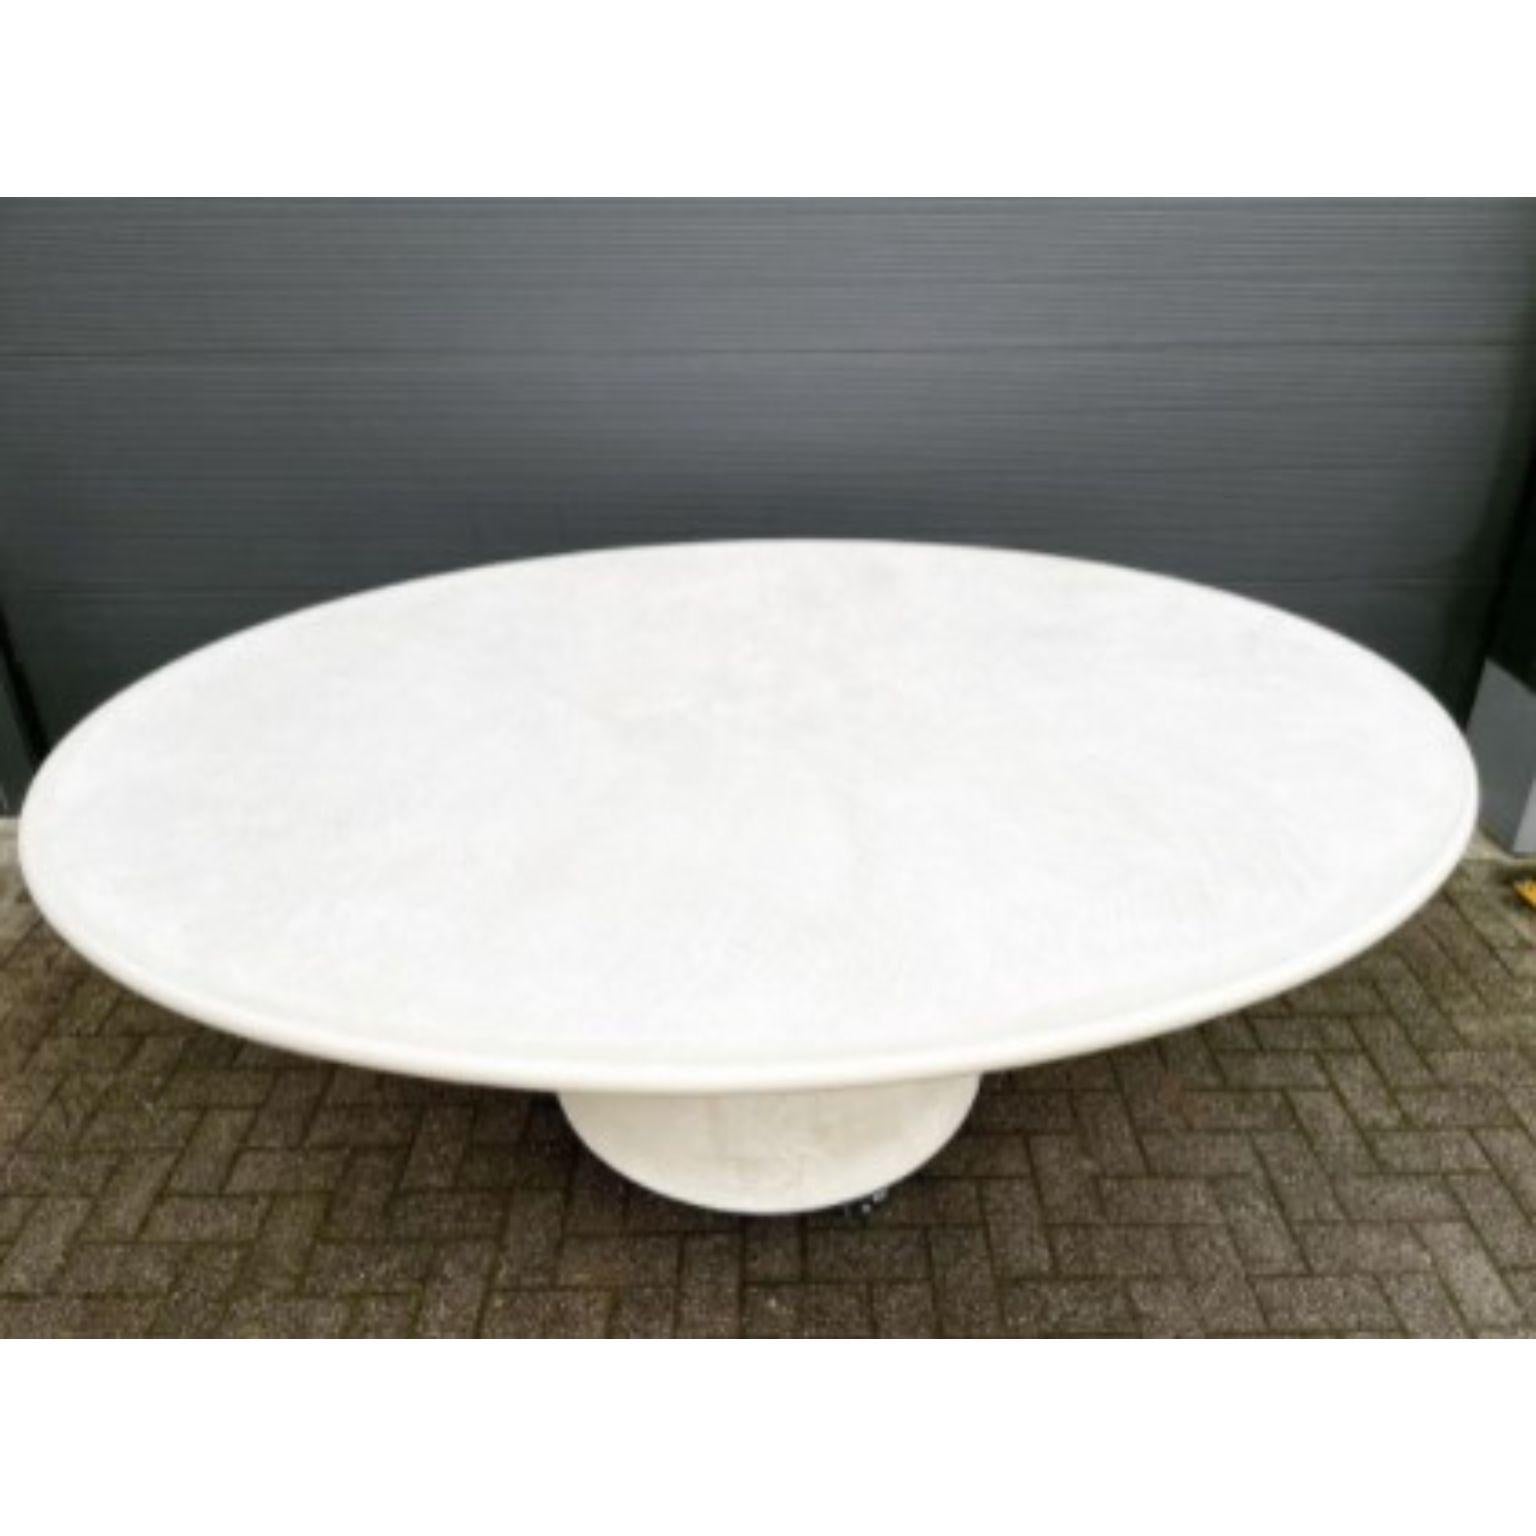 Handmade Outdoor round dining table 120 by Philippe Colette
Dimensions: Ø 120 
 foot diameter: 40 cm
Customized height
Materials: Mineral lime plaster.

All shapes / sizes can be customized. Wide range of colors.

Our tables are in mineral